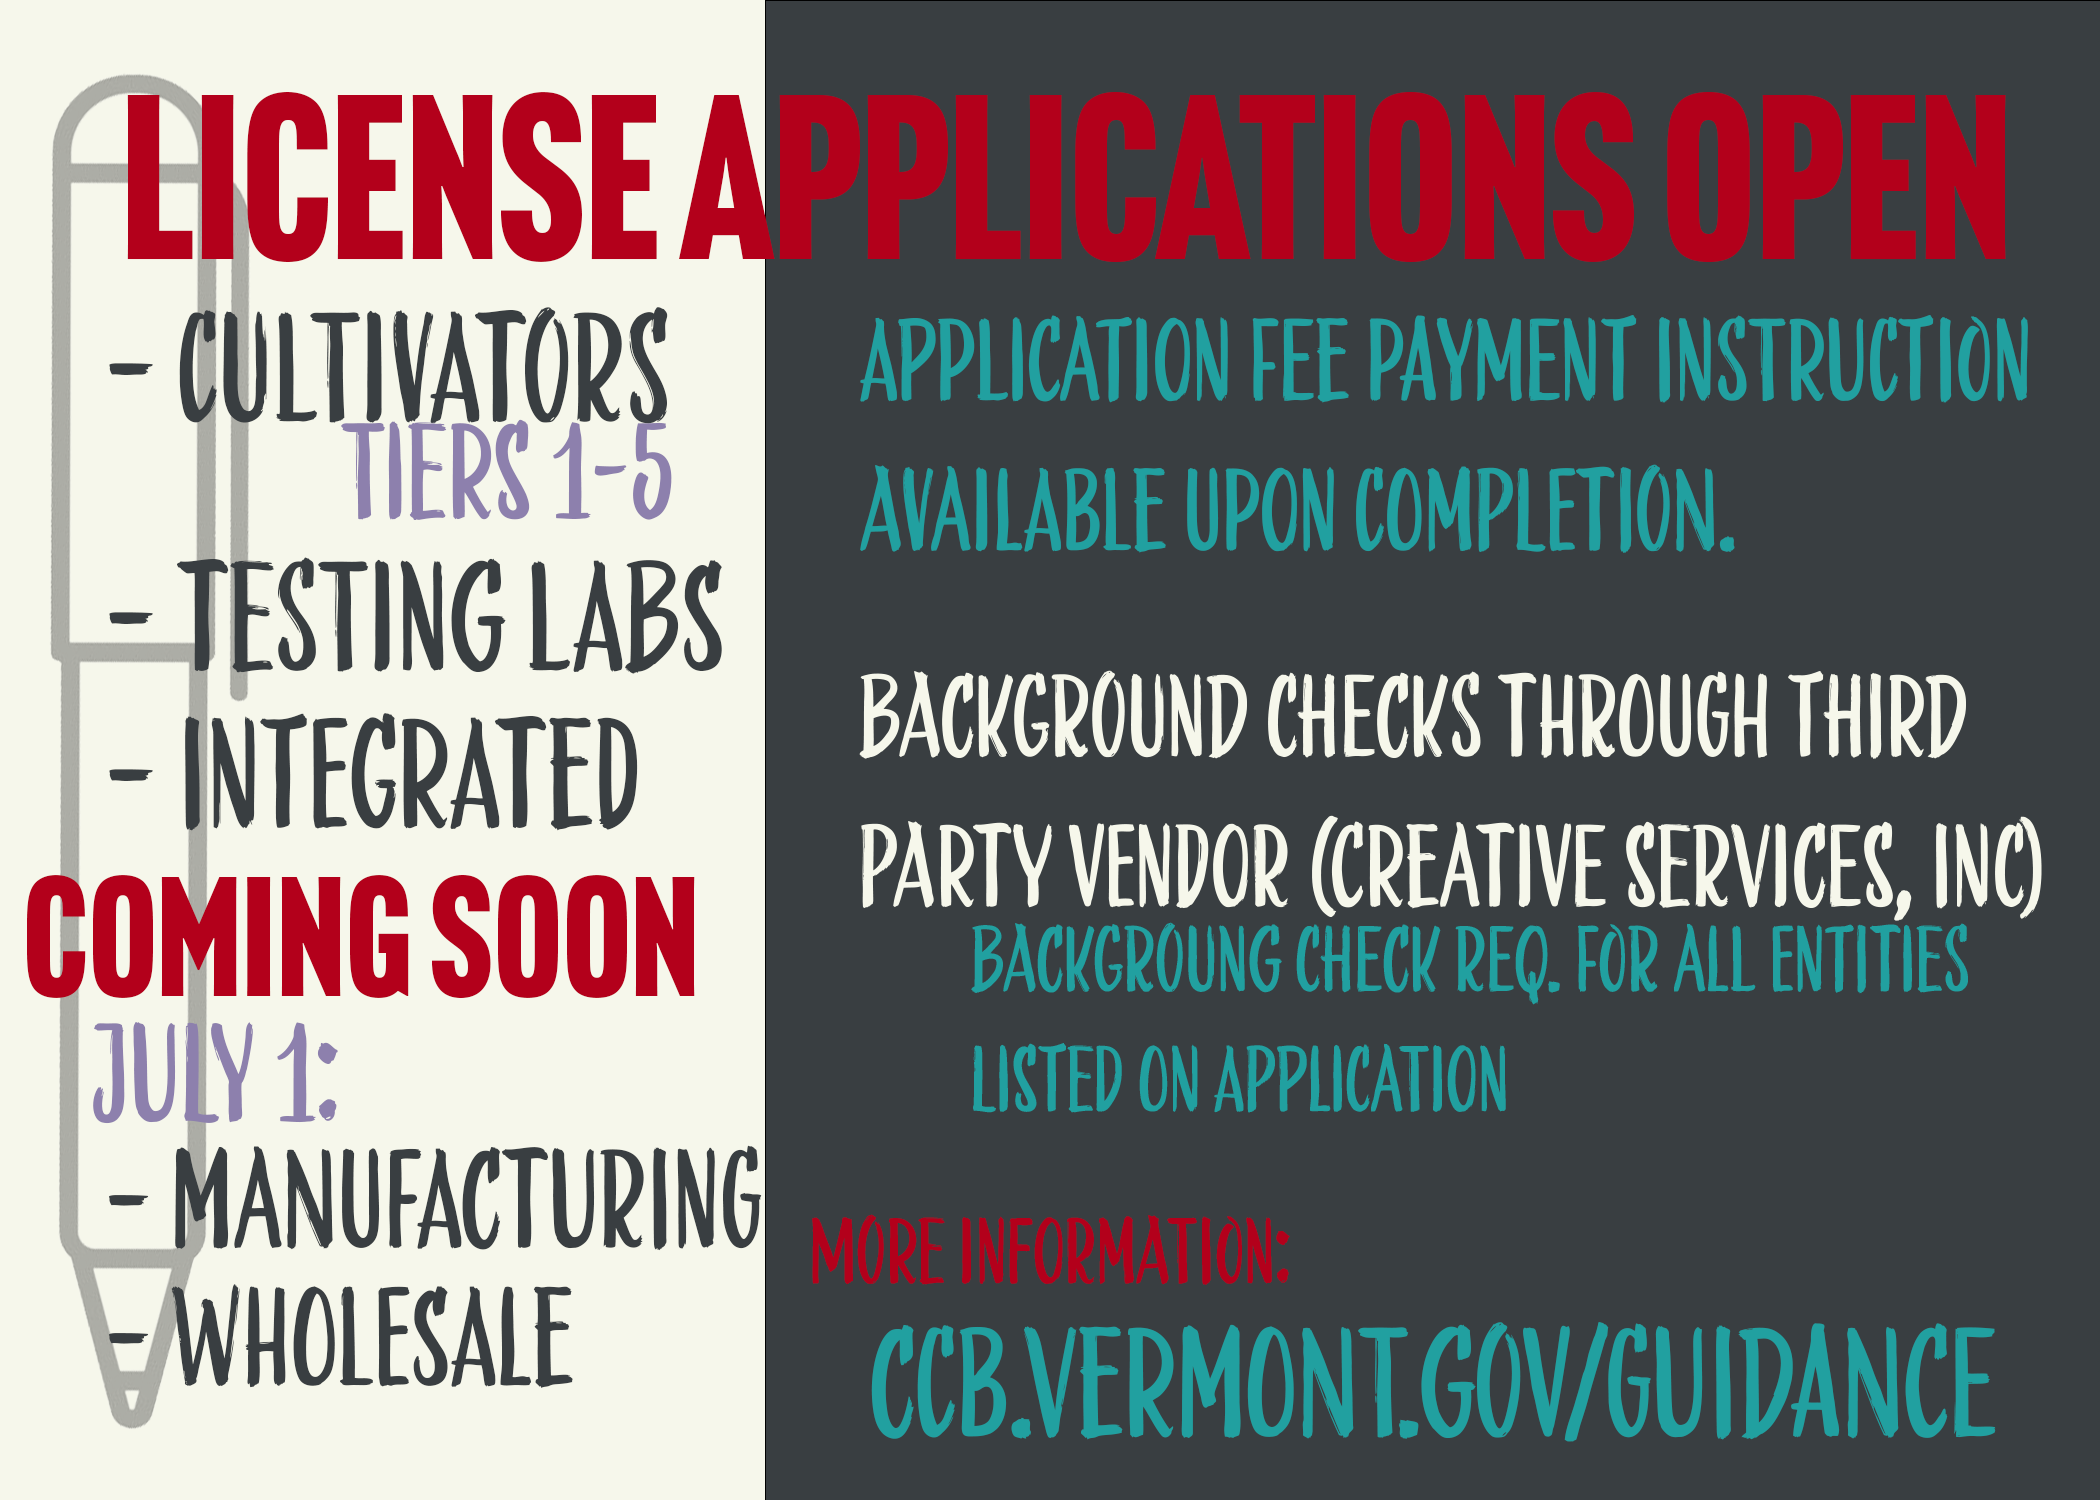 License Applications are Open for Cultivation Tiers 1-5, testing labs, and integrated licenses